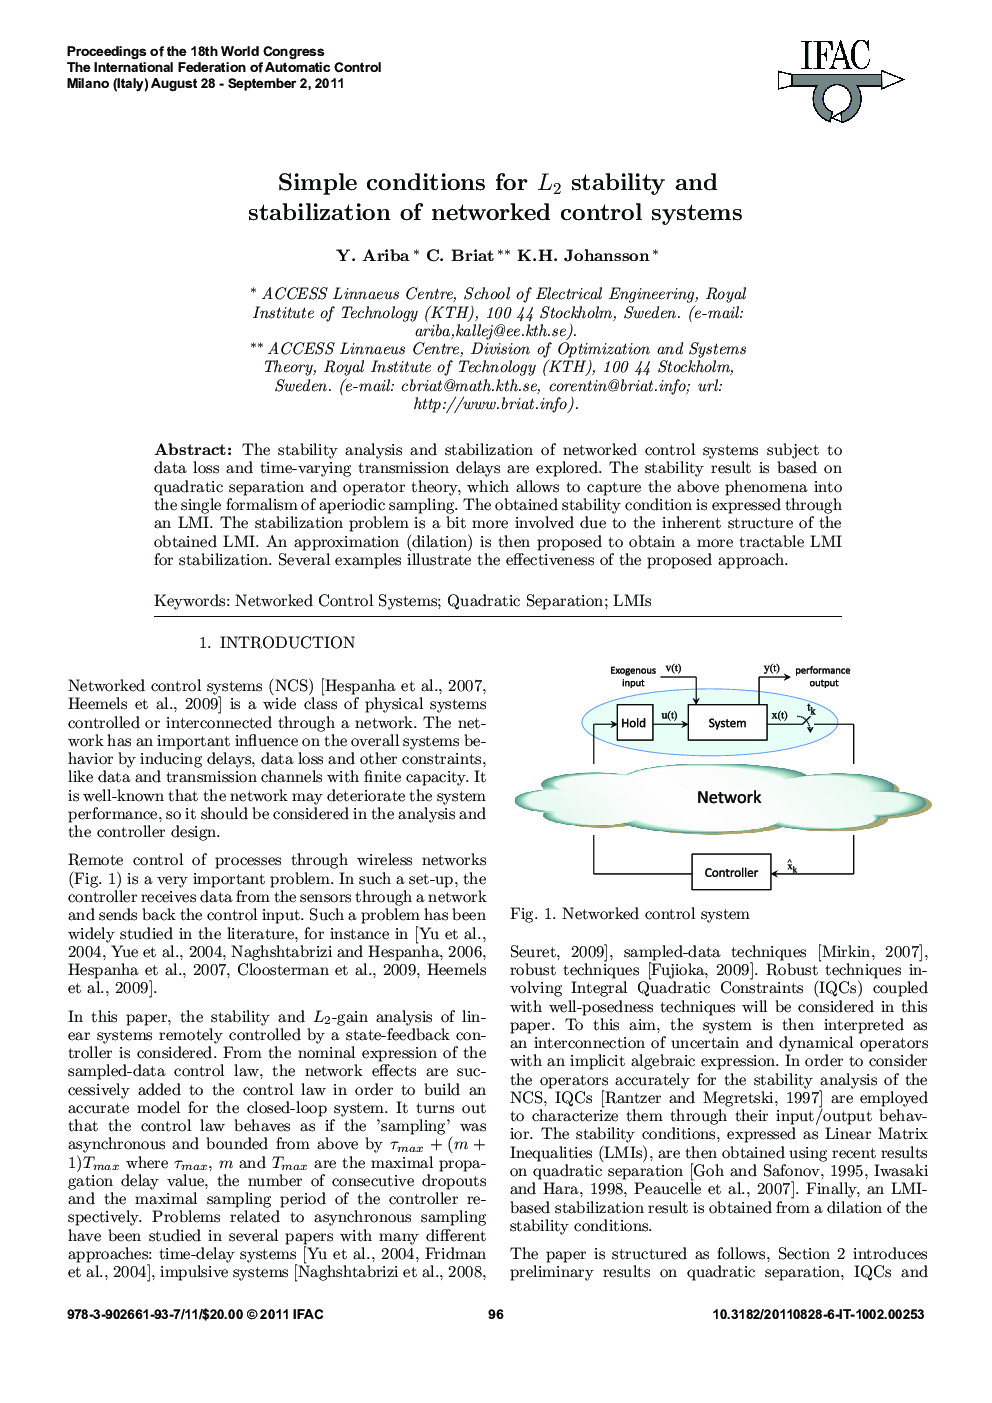 Simple conditions for L2 stability and stabilization of networked control systems